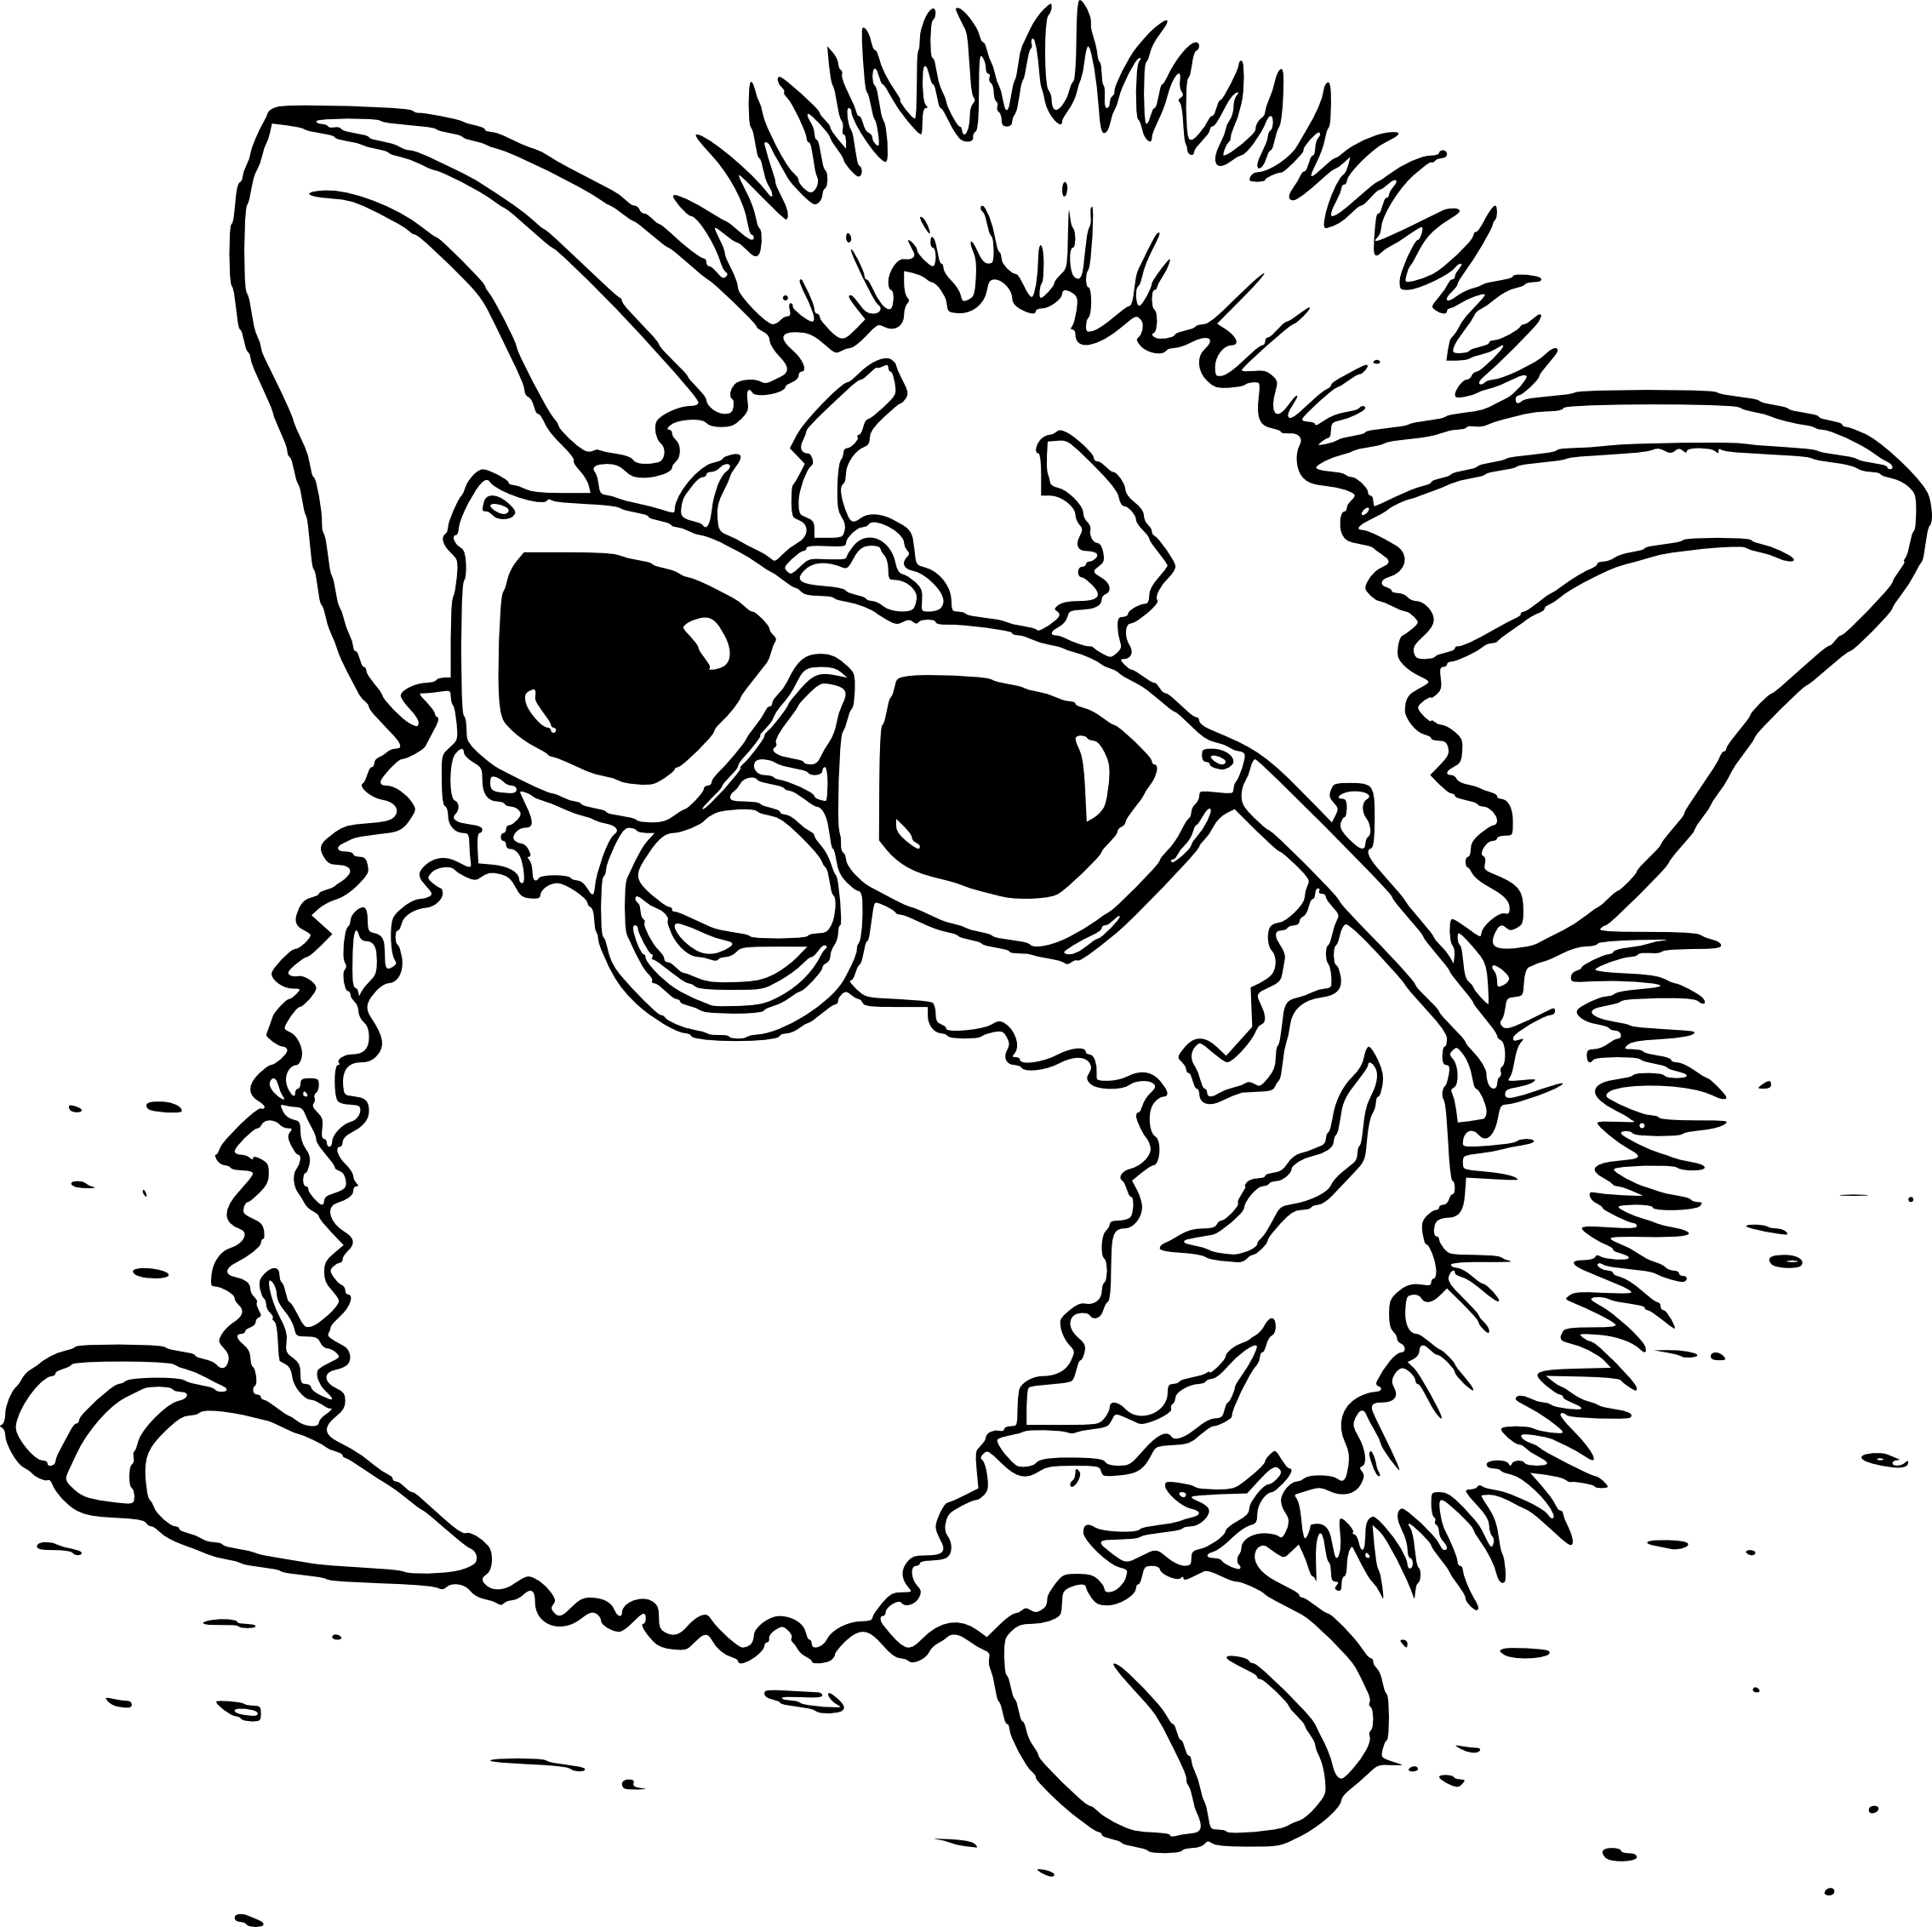 Furby coloring page